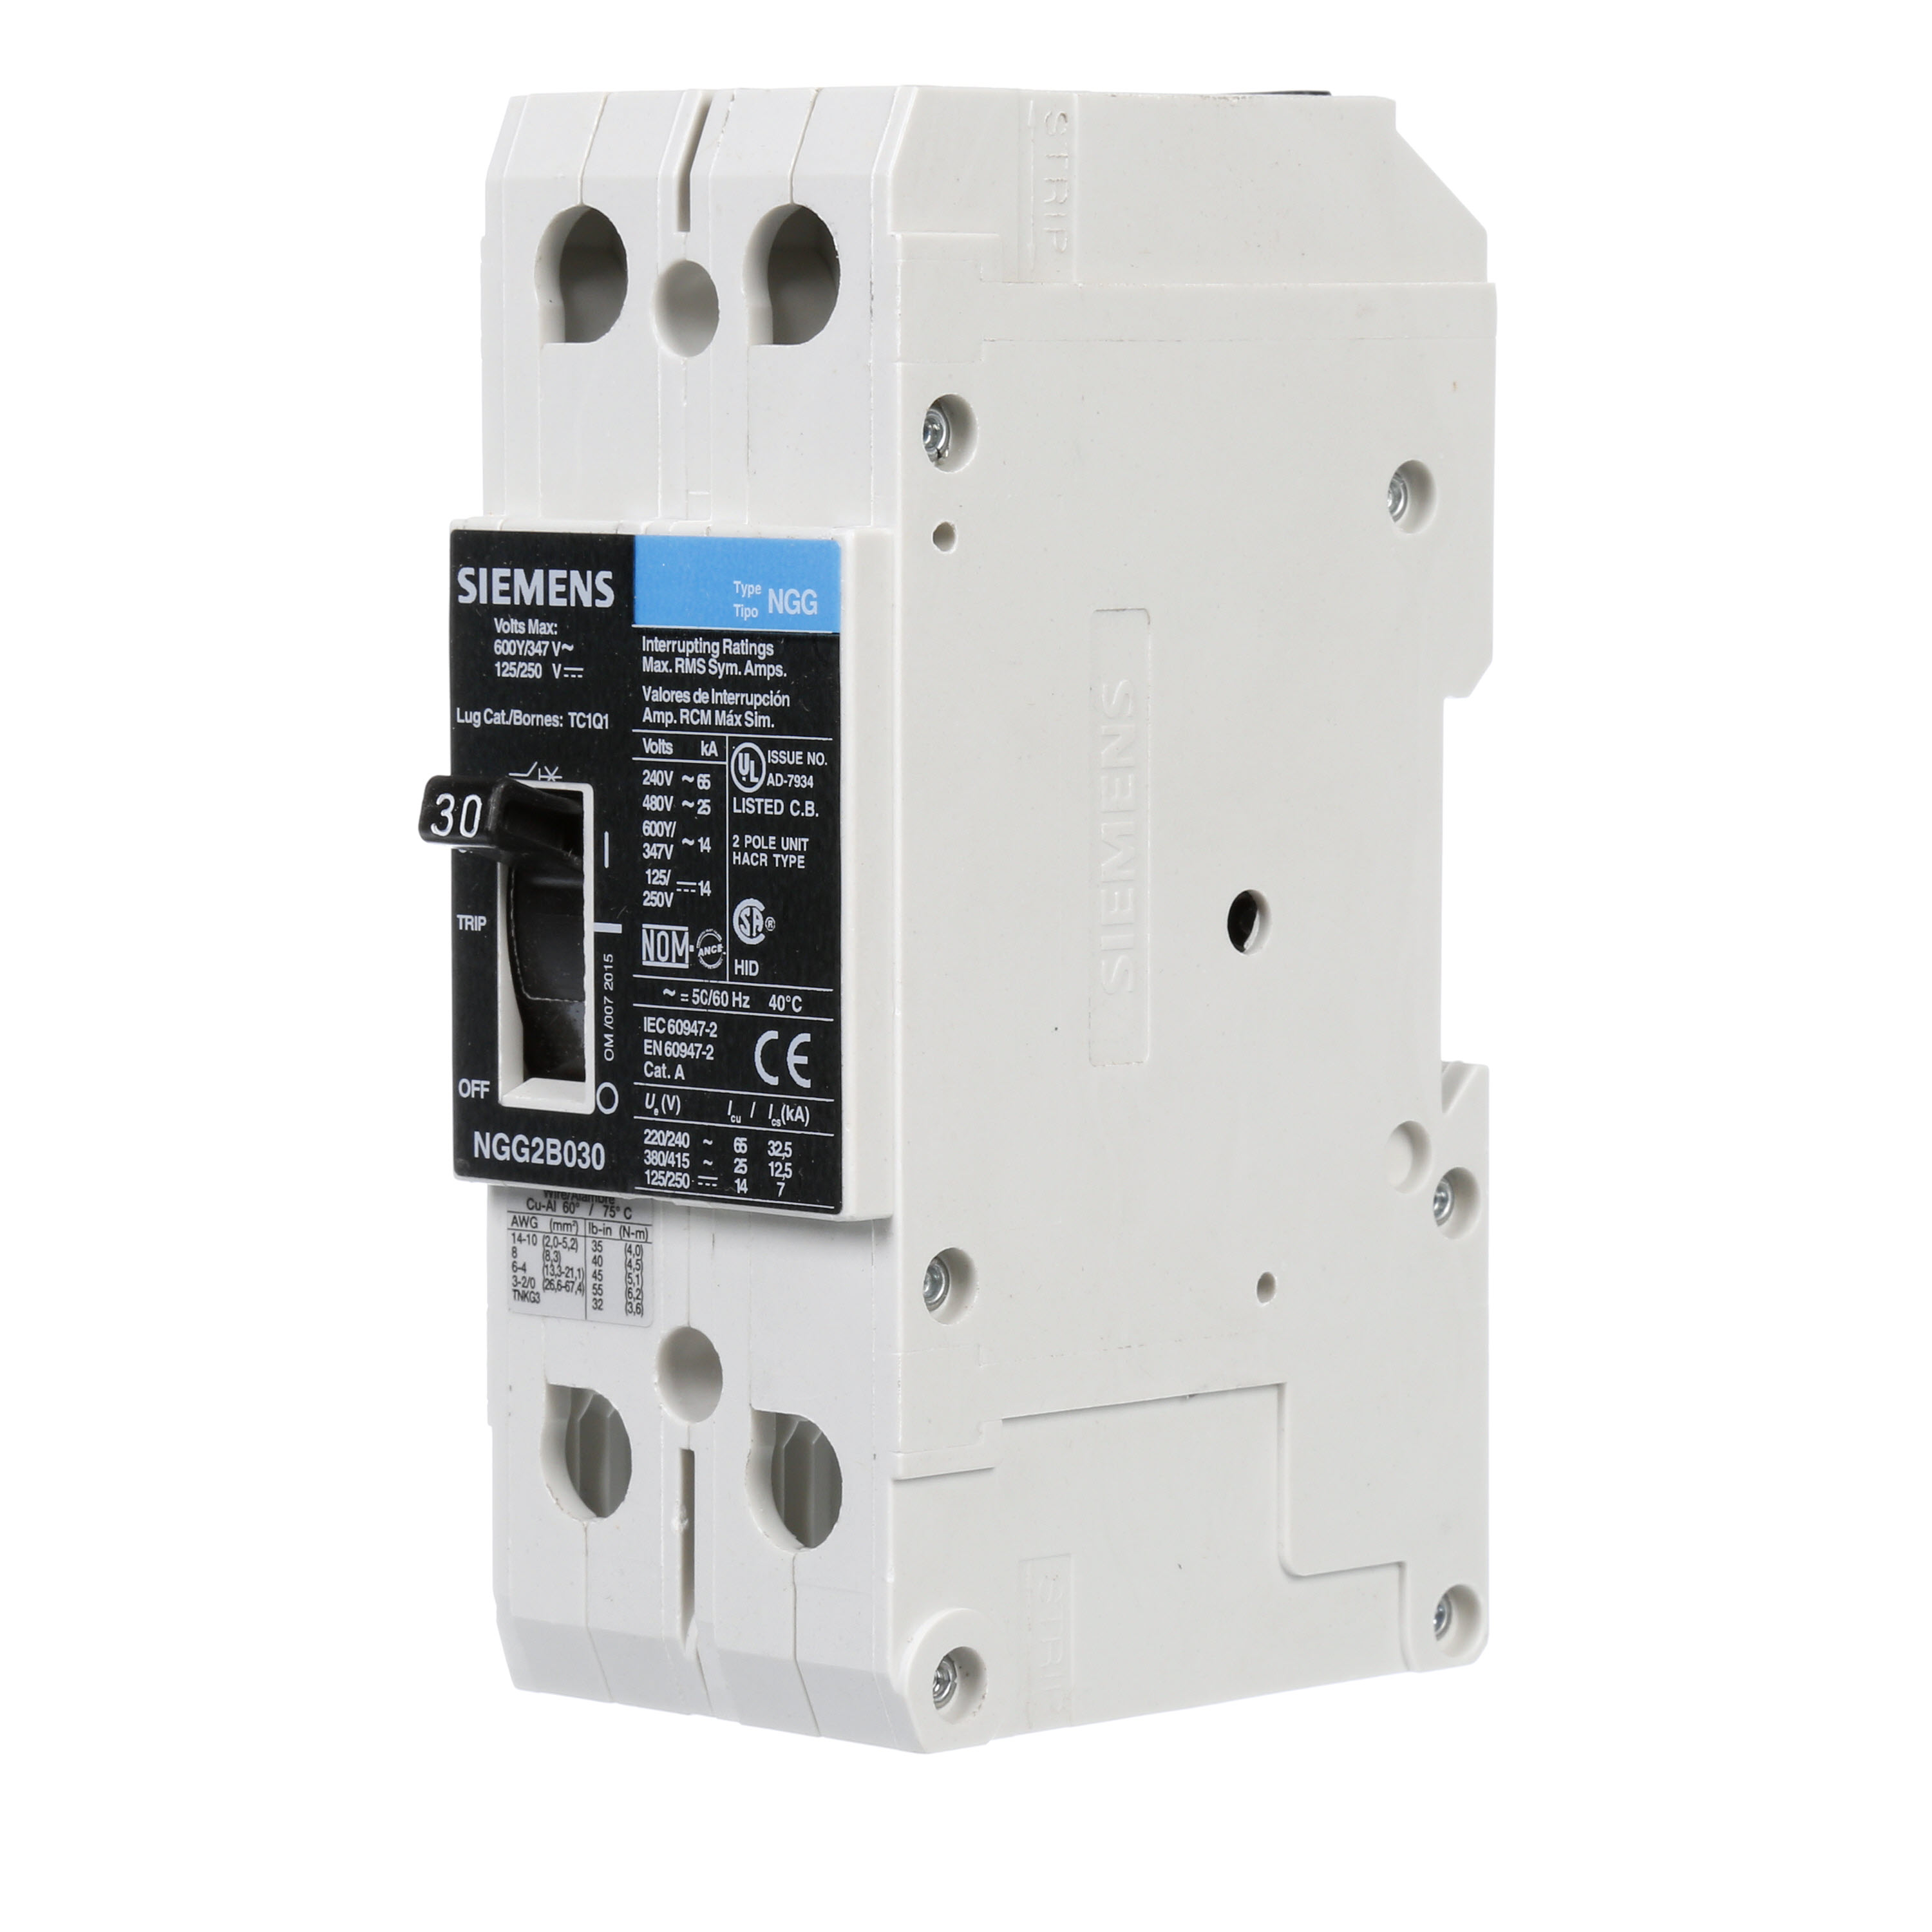 SIEMENS LOW VOLTAGE G FRAME CIRCUIT BREAKER WITH THERMAL - MAGNETIC TRIP. UL LISTED NGG FRAME WITH STANDARD BREAKING CAPACITY. 30A 2-POLE (14KAIC AT 600Y/347V)(25KAIC AT 480V). SPECIAL FEATURES MOUNTS ON DIN RAIL / SCREW, LINE AND LOAD SIDE LUGS (TC1Q1) WIRE RANGE 14 - 10 AWS (CU/AL). DIMENSIONS (W x H x D) IN 2 x 5.4 x 2.8.